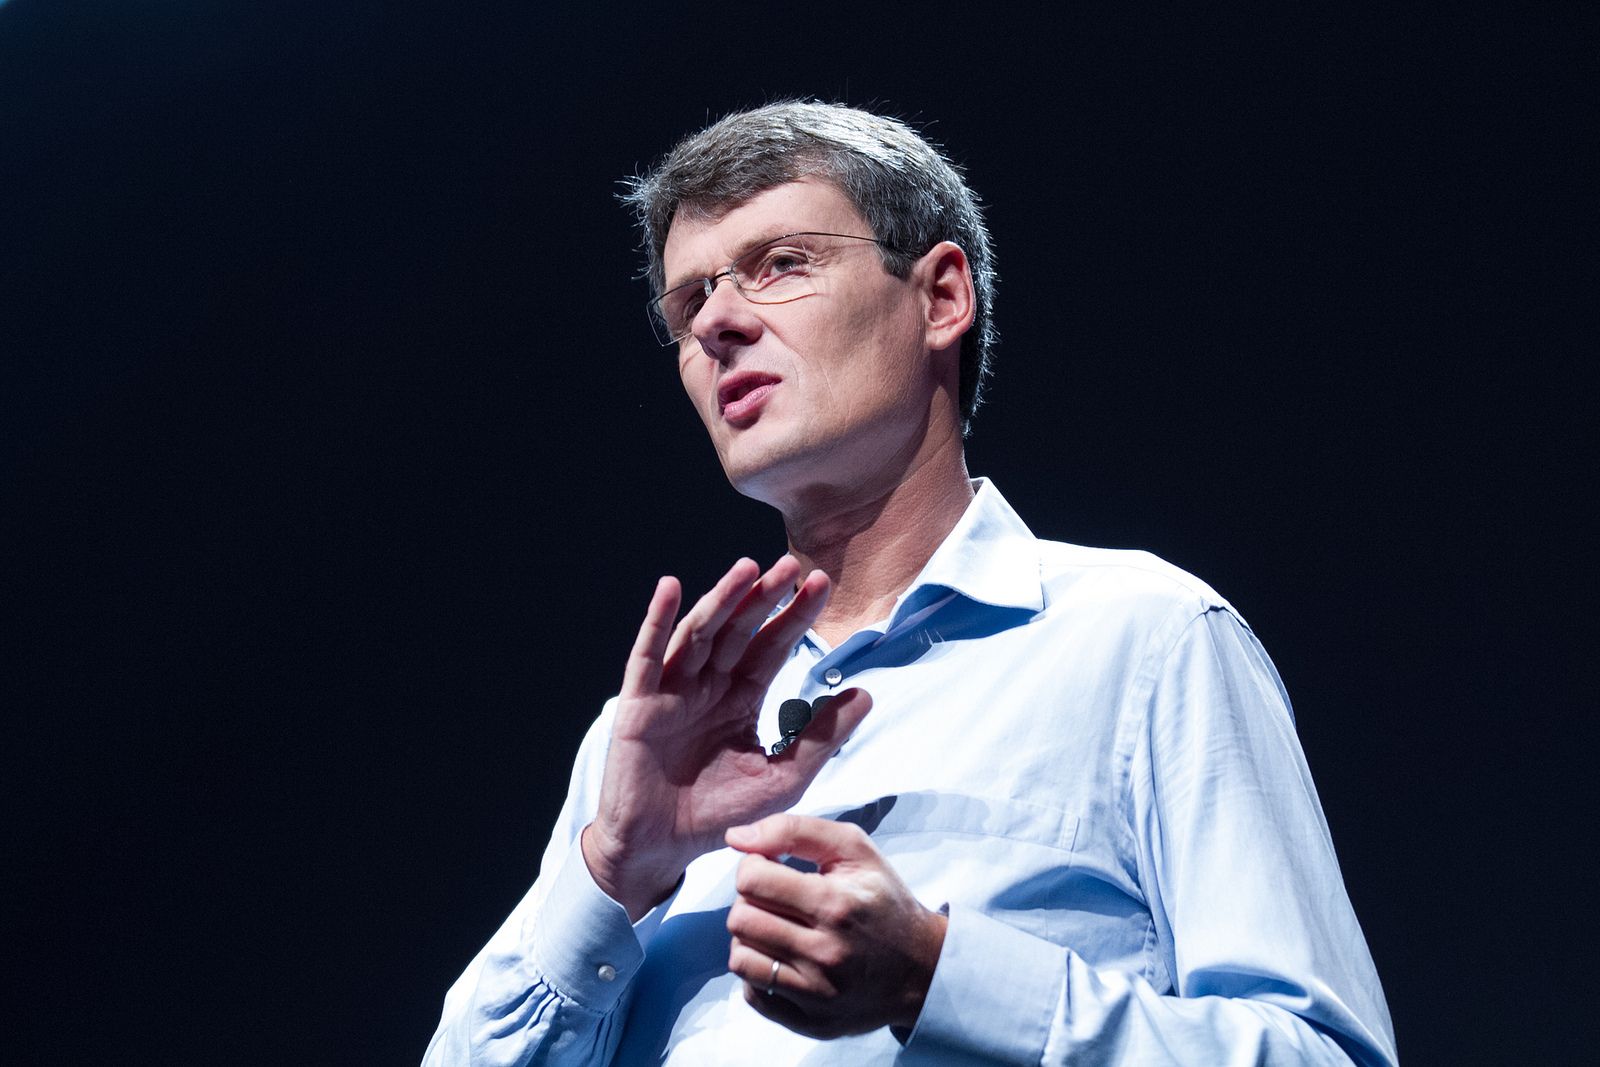 blackberry ceo thorsten heins fired as company decides against buyout image 1